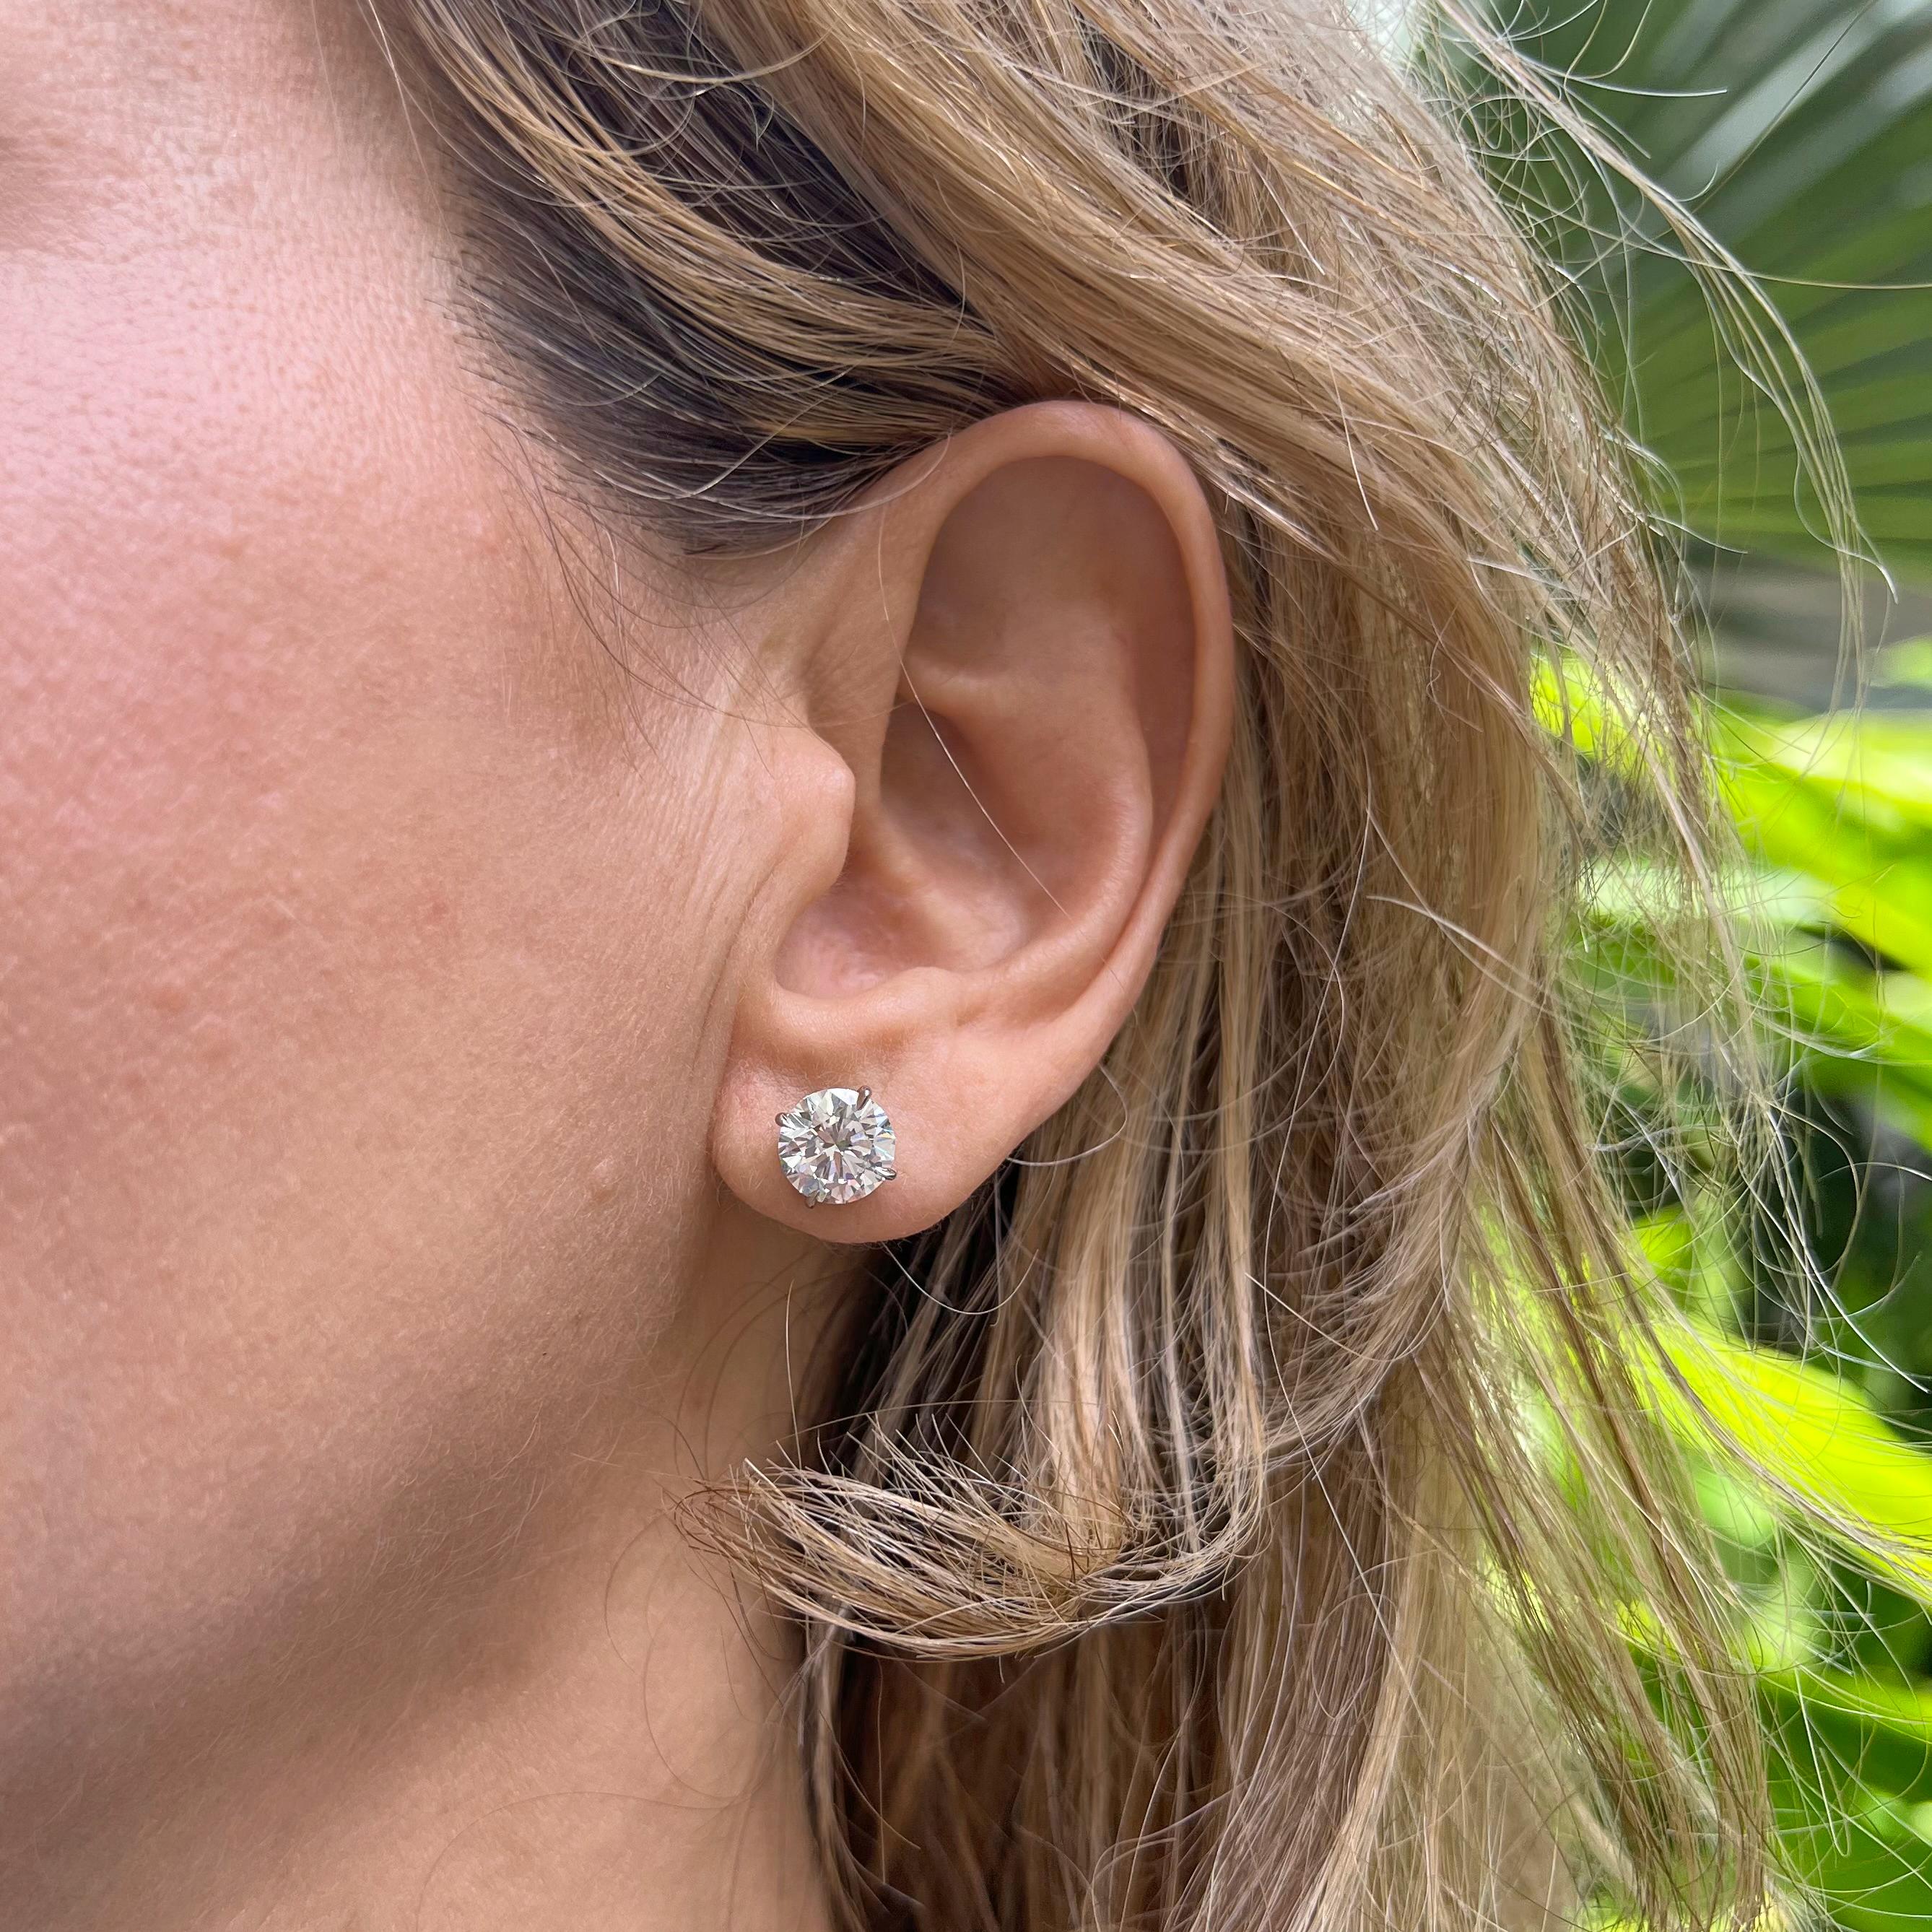 Round brilliant-cut diamond stud earrings, featuring a pair of meticulously-matched near-colorless diamonds weighing 4.02 total carats, the diamonds secured in four-prong platinum martini settings with posts for pierced ears. Both diamonds are